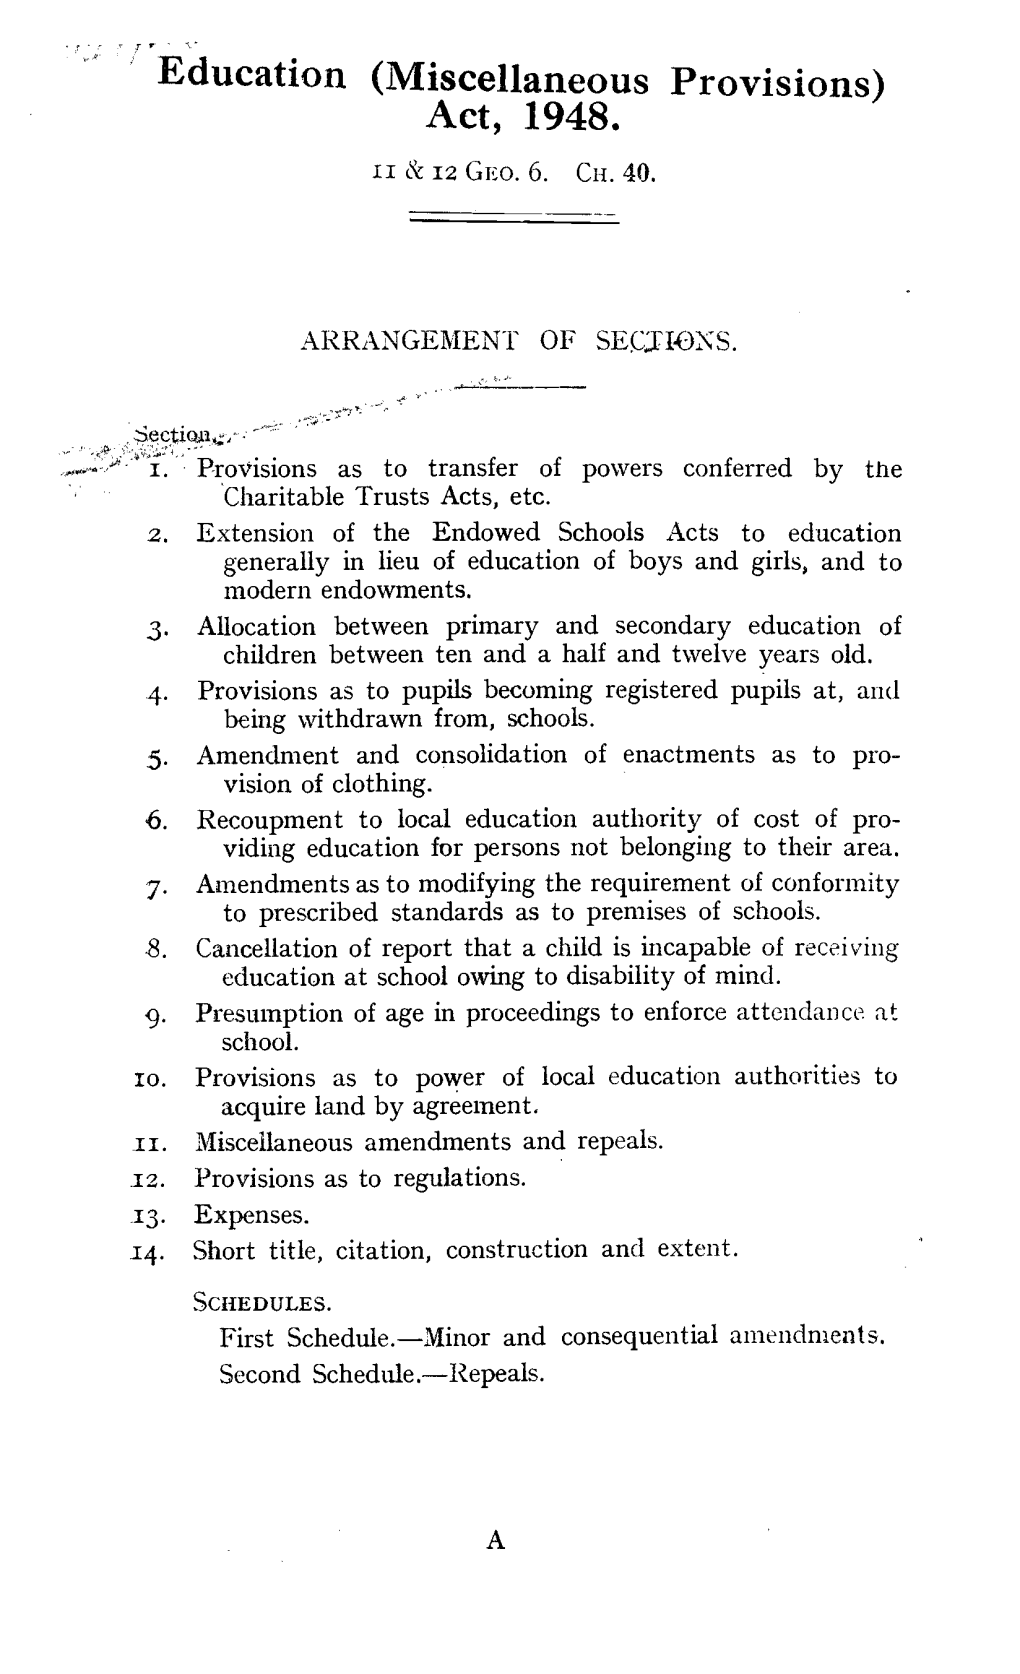 Education (Miscellaneous Provisions) Act, 1948